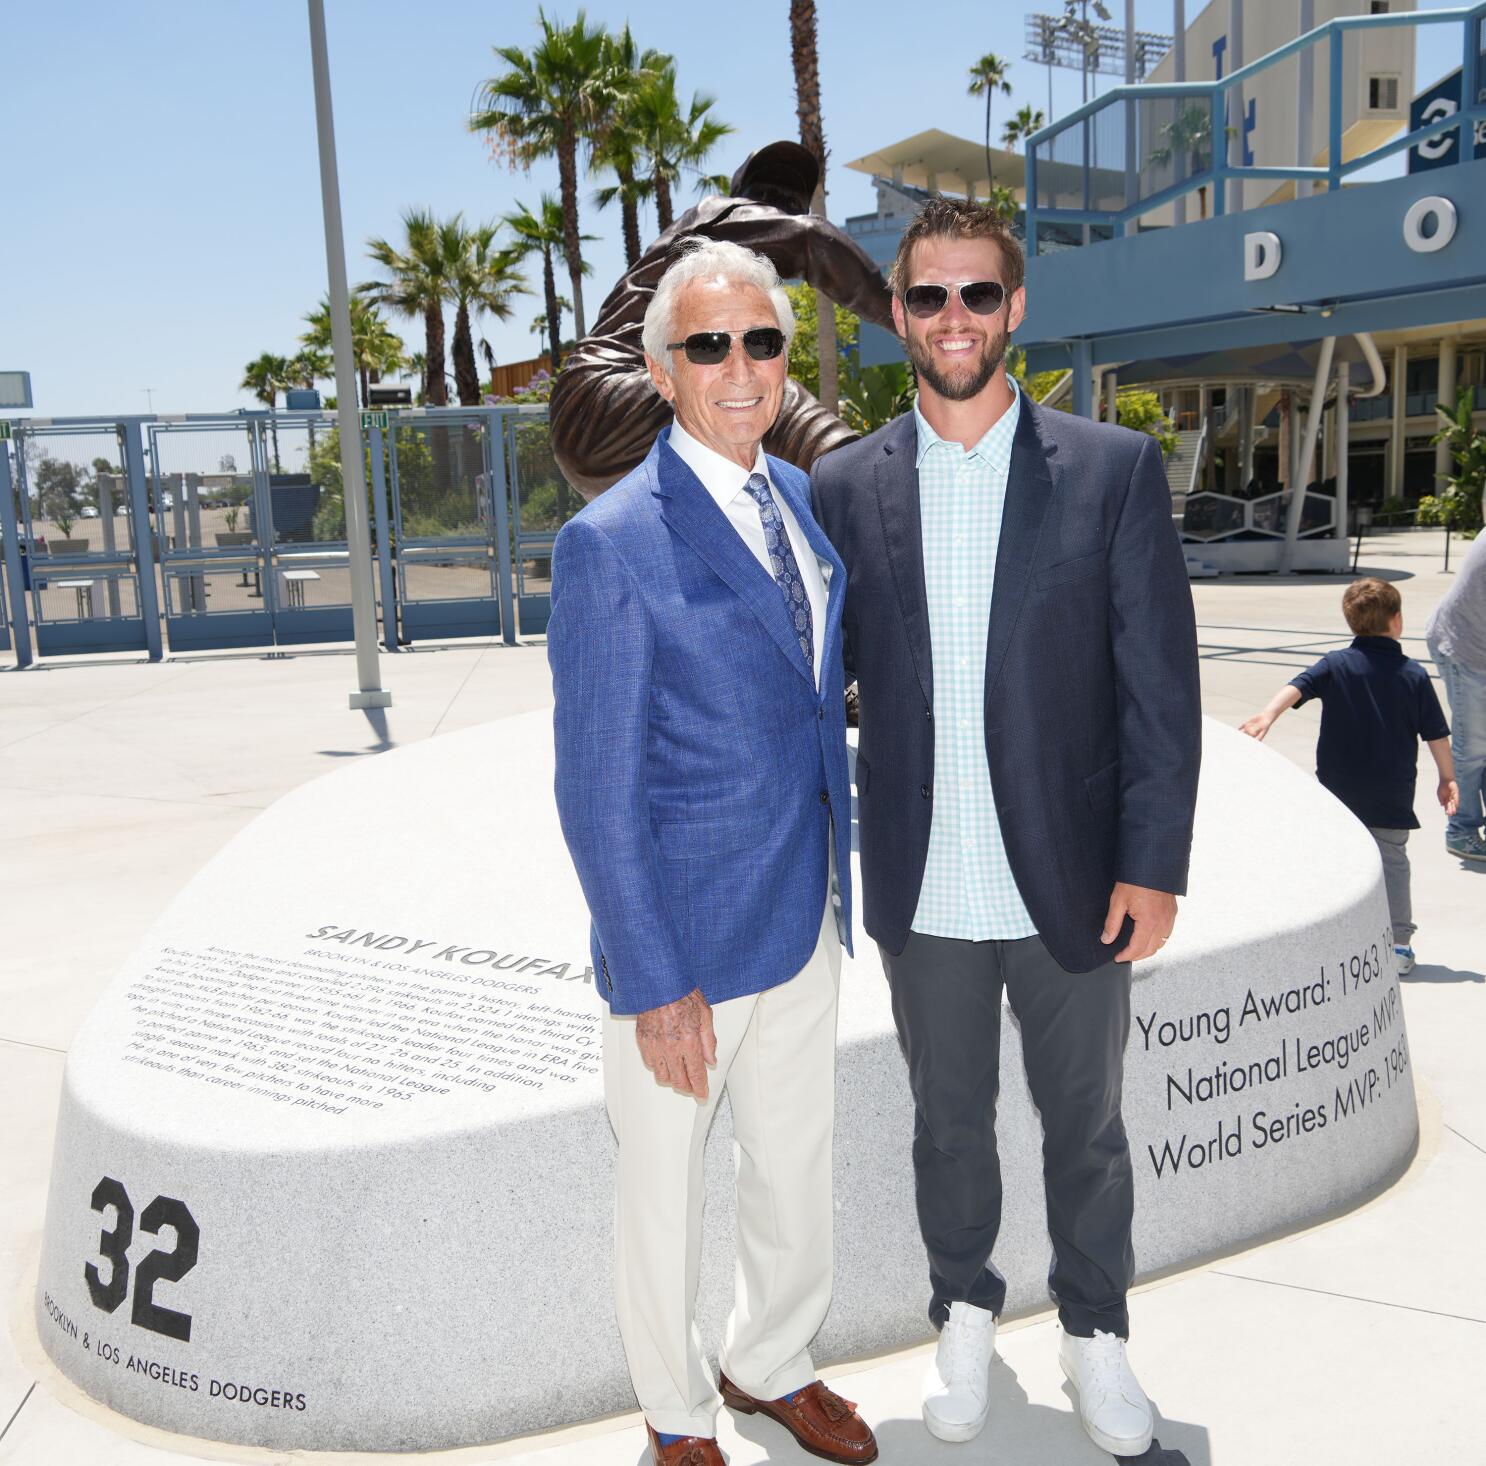 Sandy Koufax statue unveiling ceremony a time of gratitude - Los